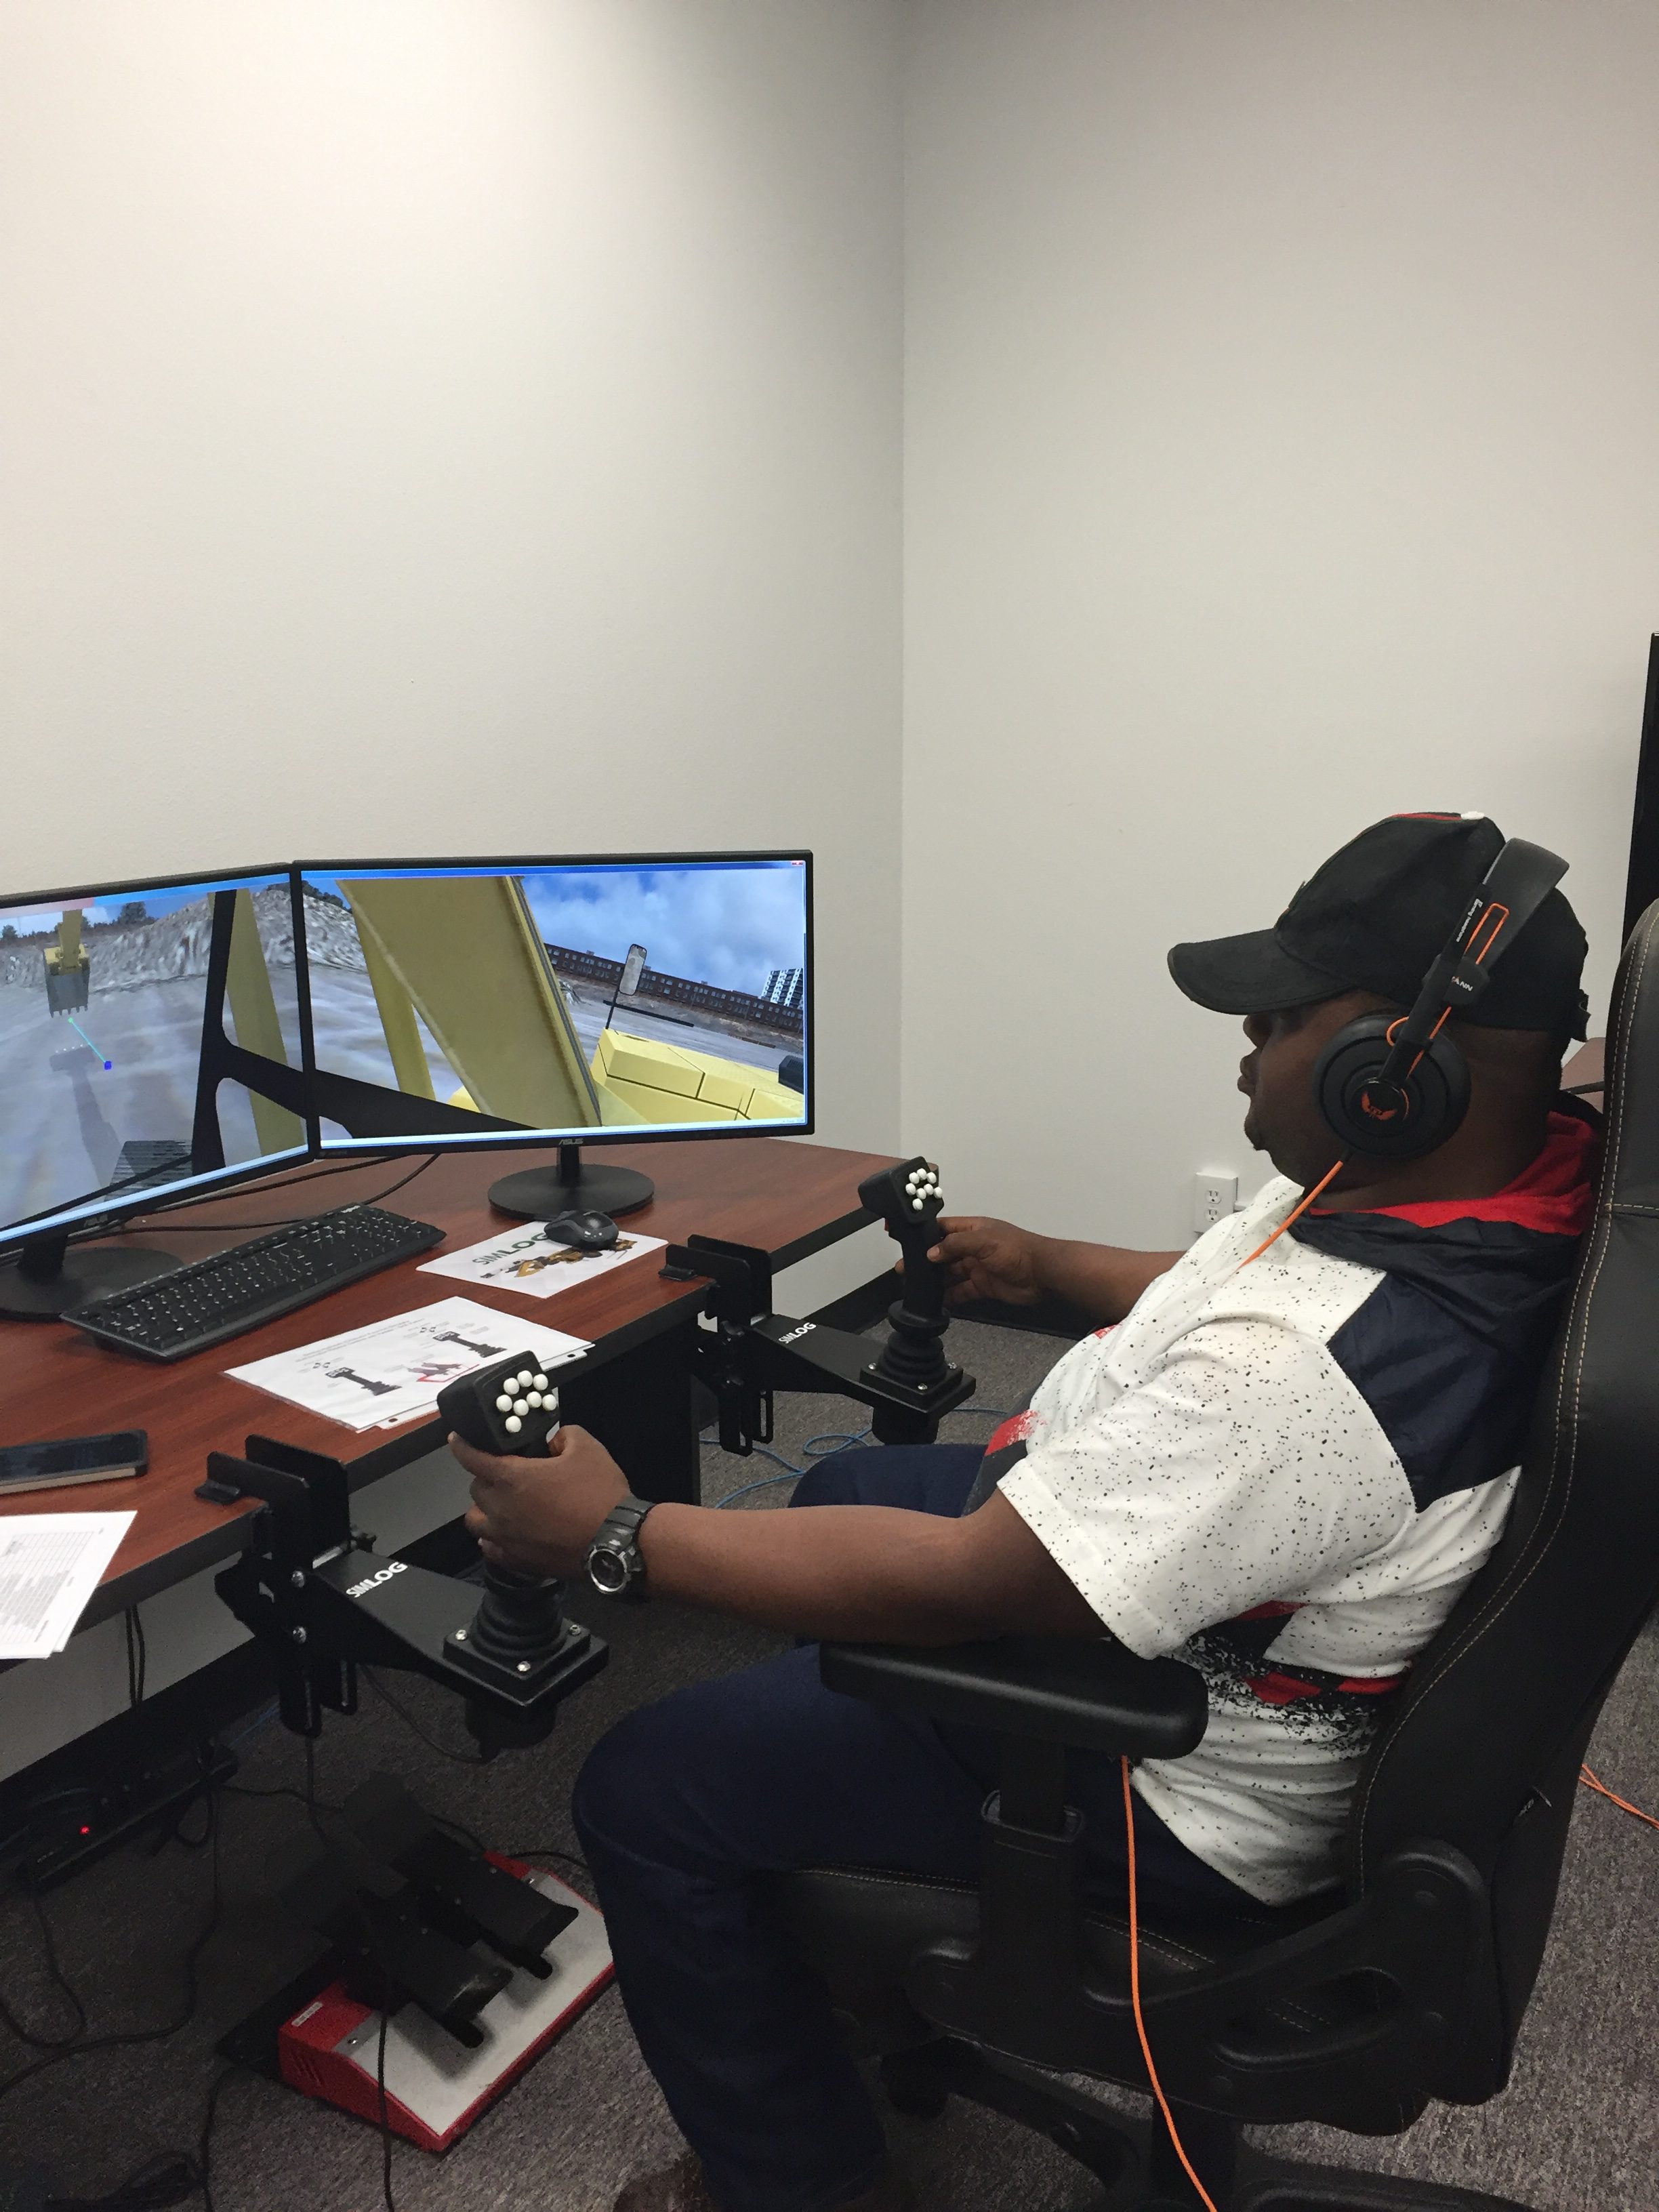 A student practices using an excavator simulator.